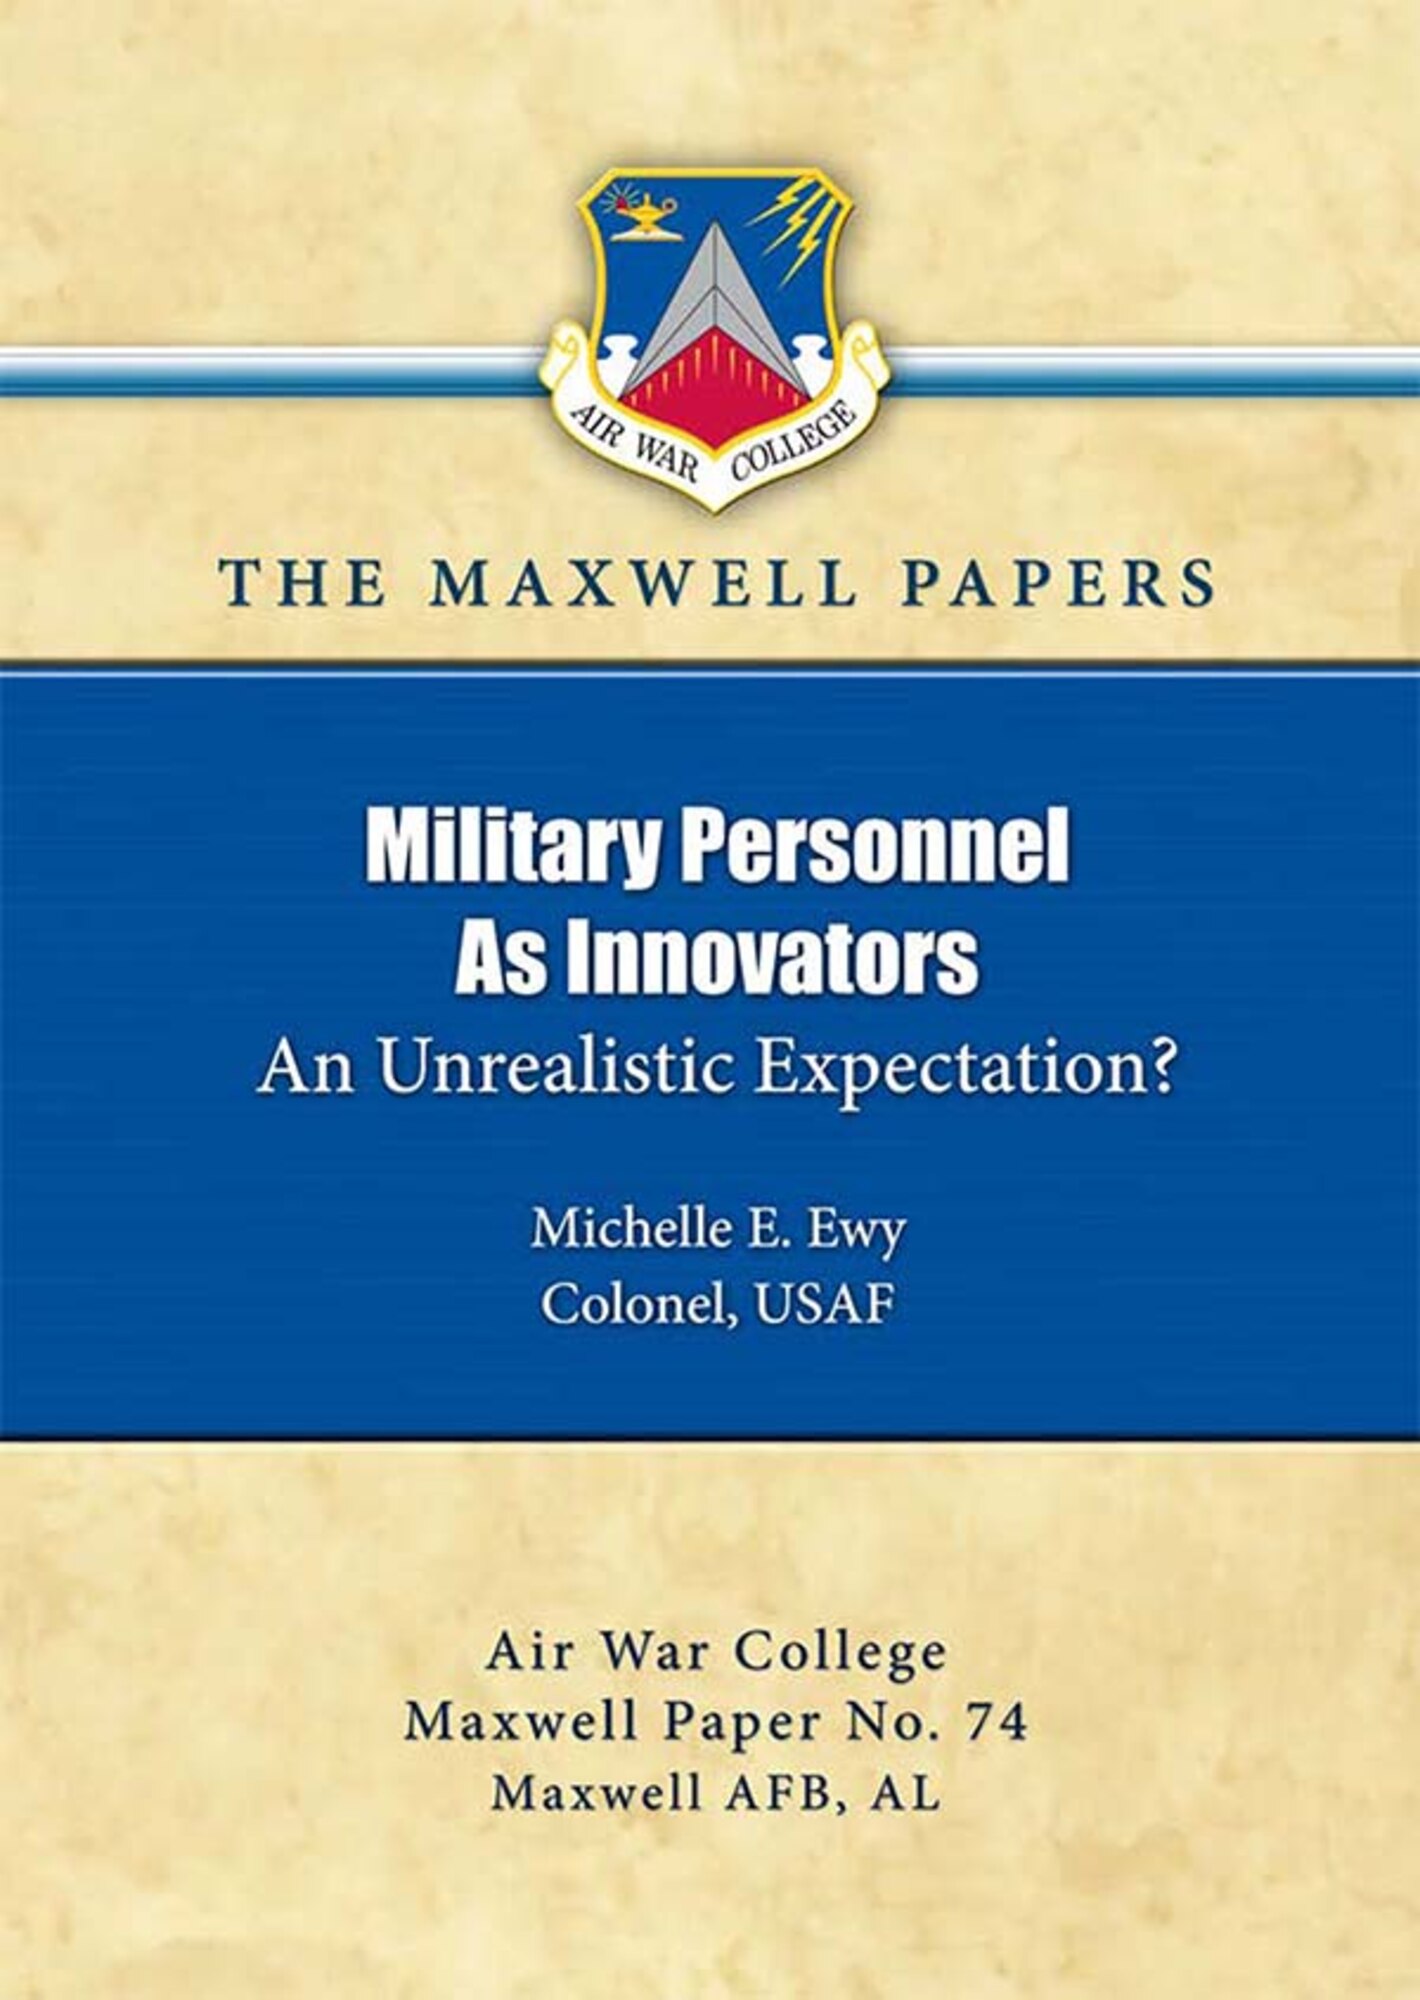 Military Personnel As Innovators: An Unrealistic Expectation?